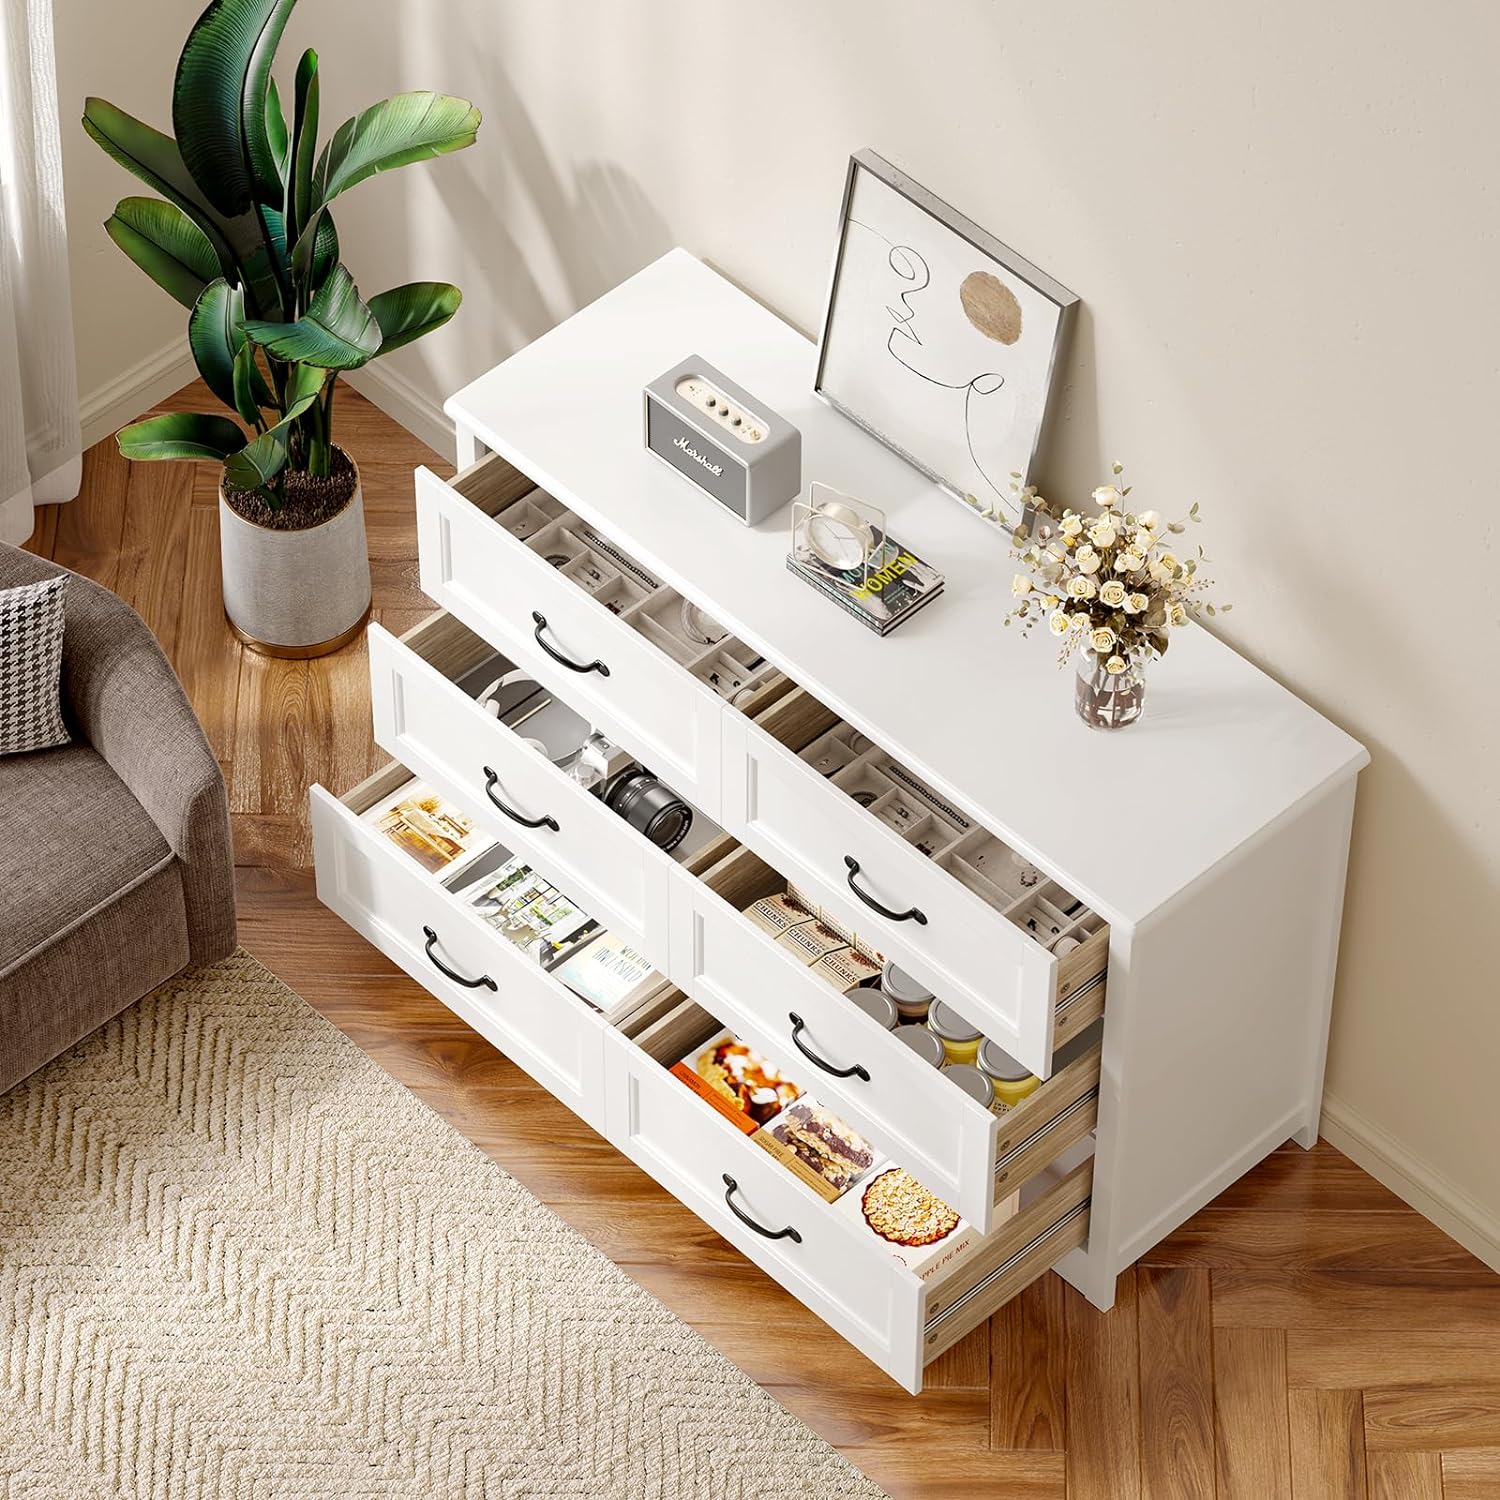 Gizoon 6 Drawer Dresser for Bedroom White Dressers Chests of Drawers with Mental Handle